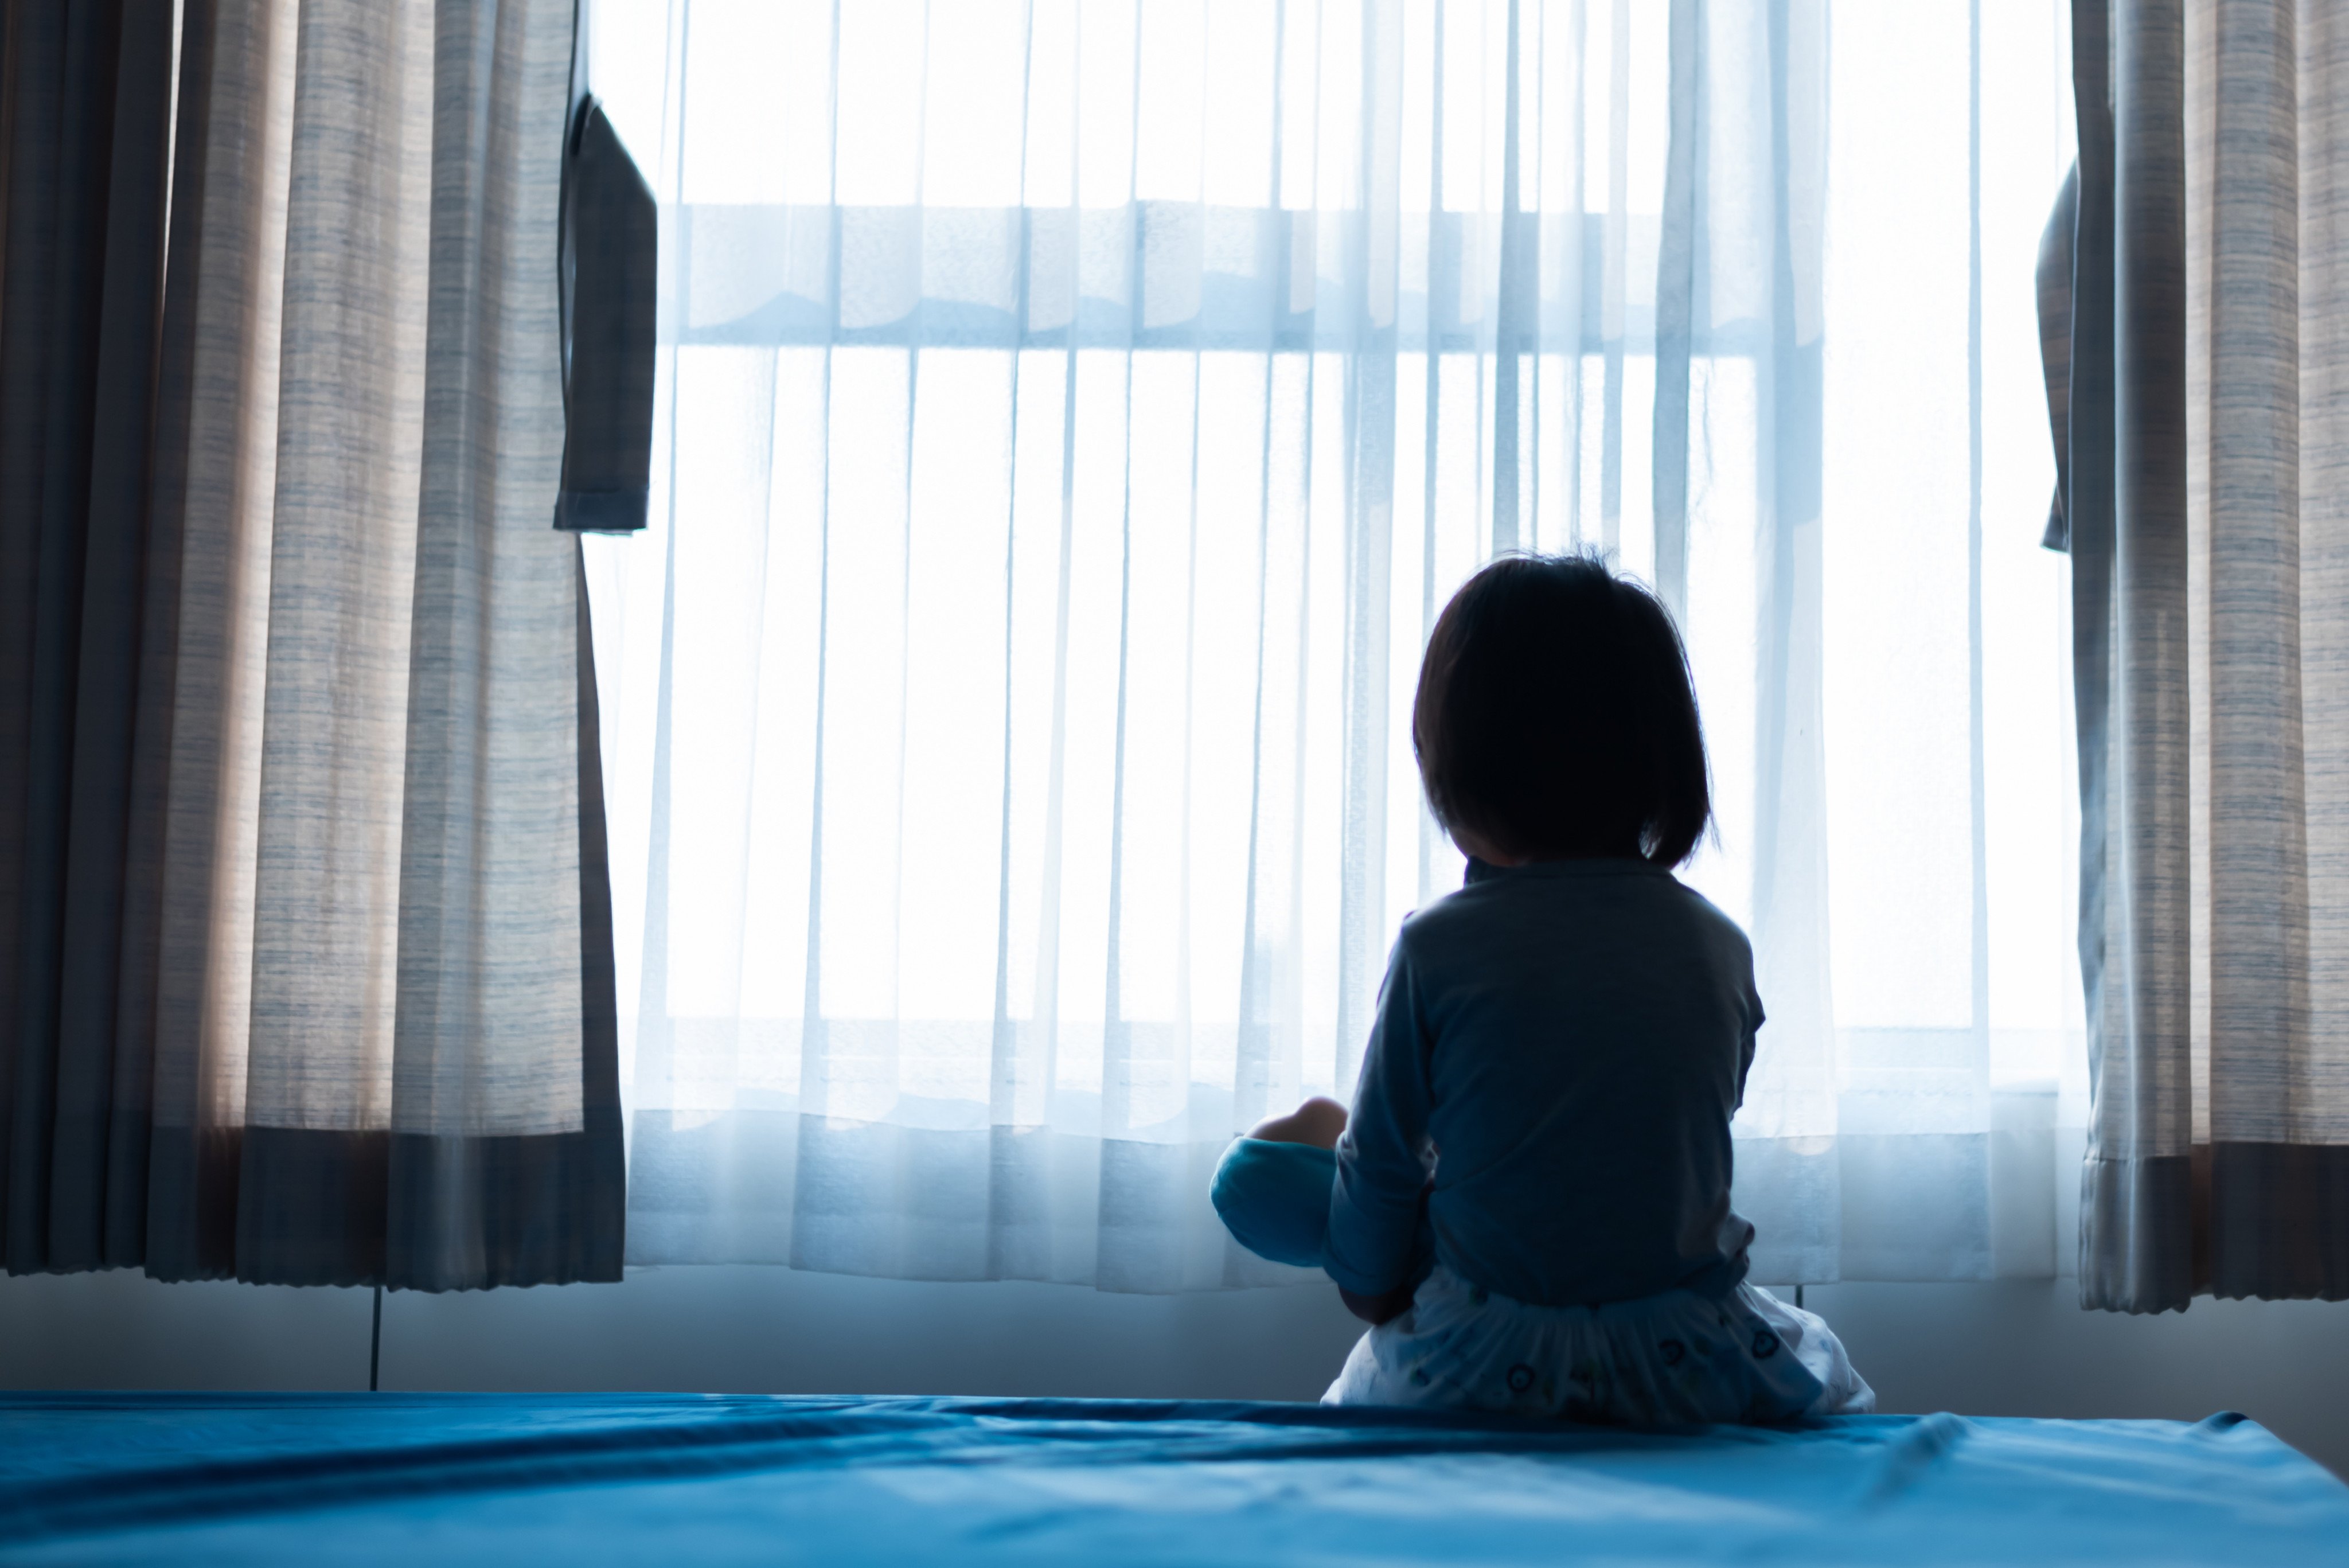 Under the bill, professionals who fail to report suspected child abuse could face a three-month prison term and a HK$50,000 (US$6,400) fine. Photo: Shutterstock